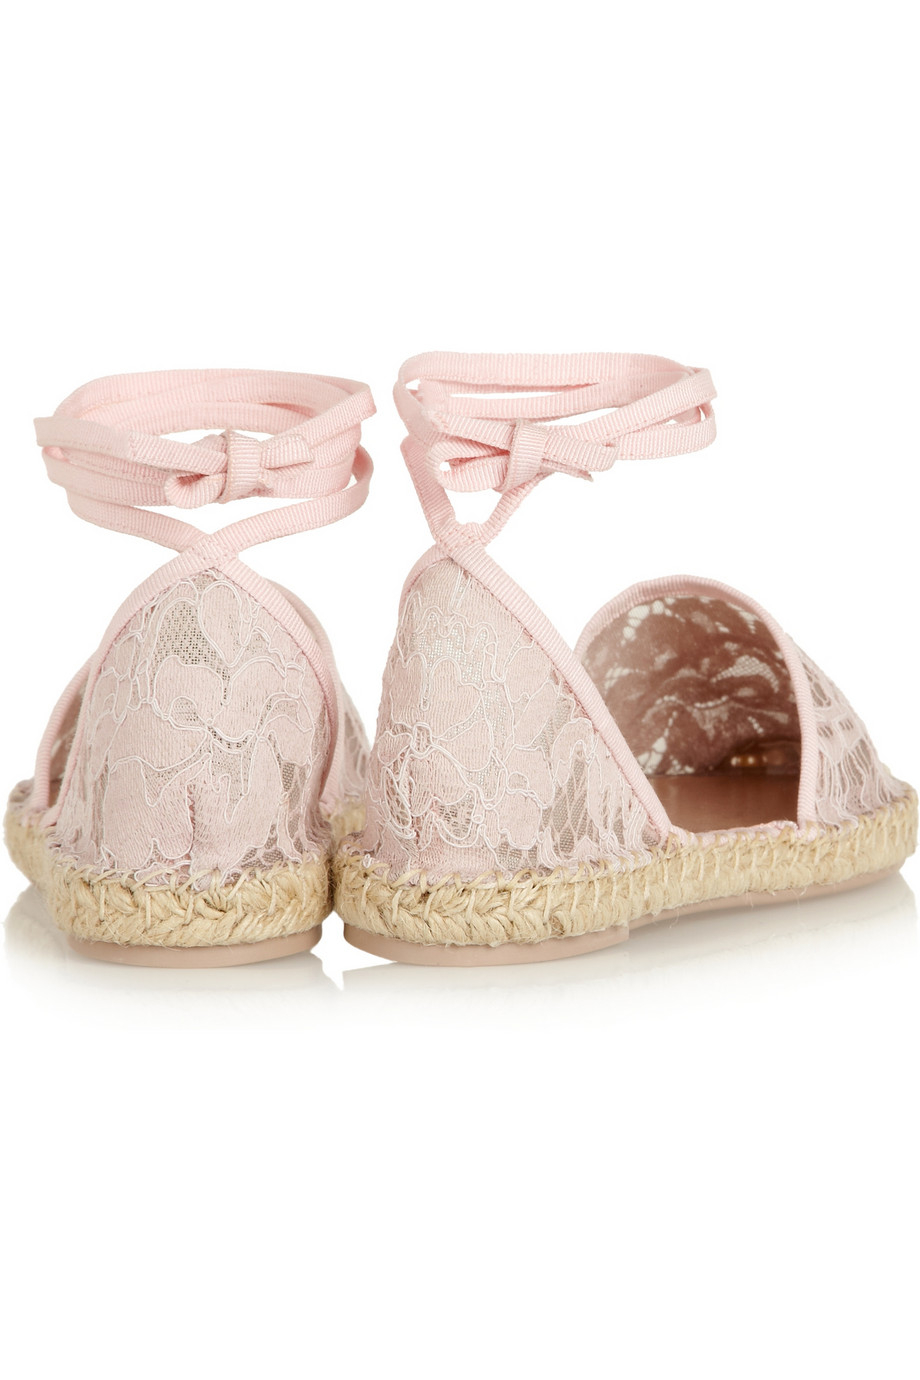 Lyst - Valentino Lace Espadrilles in Pink